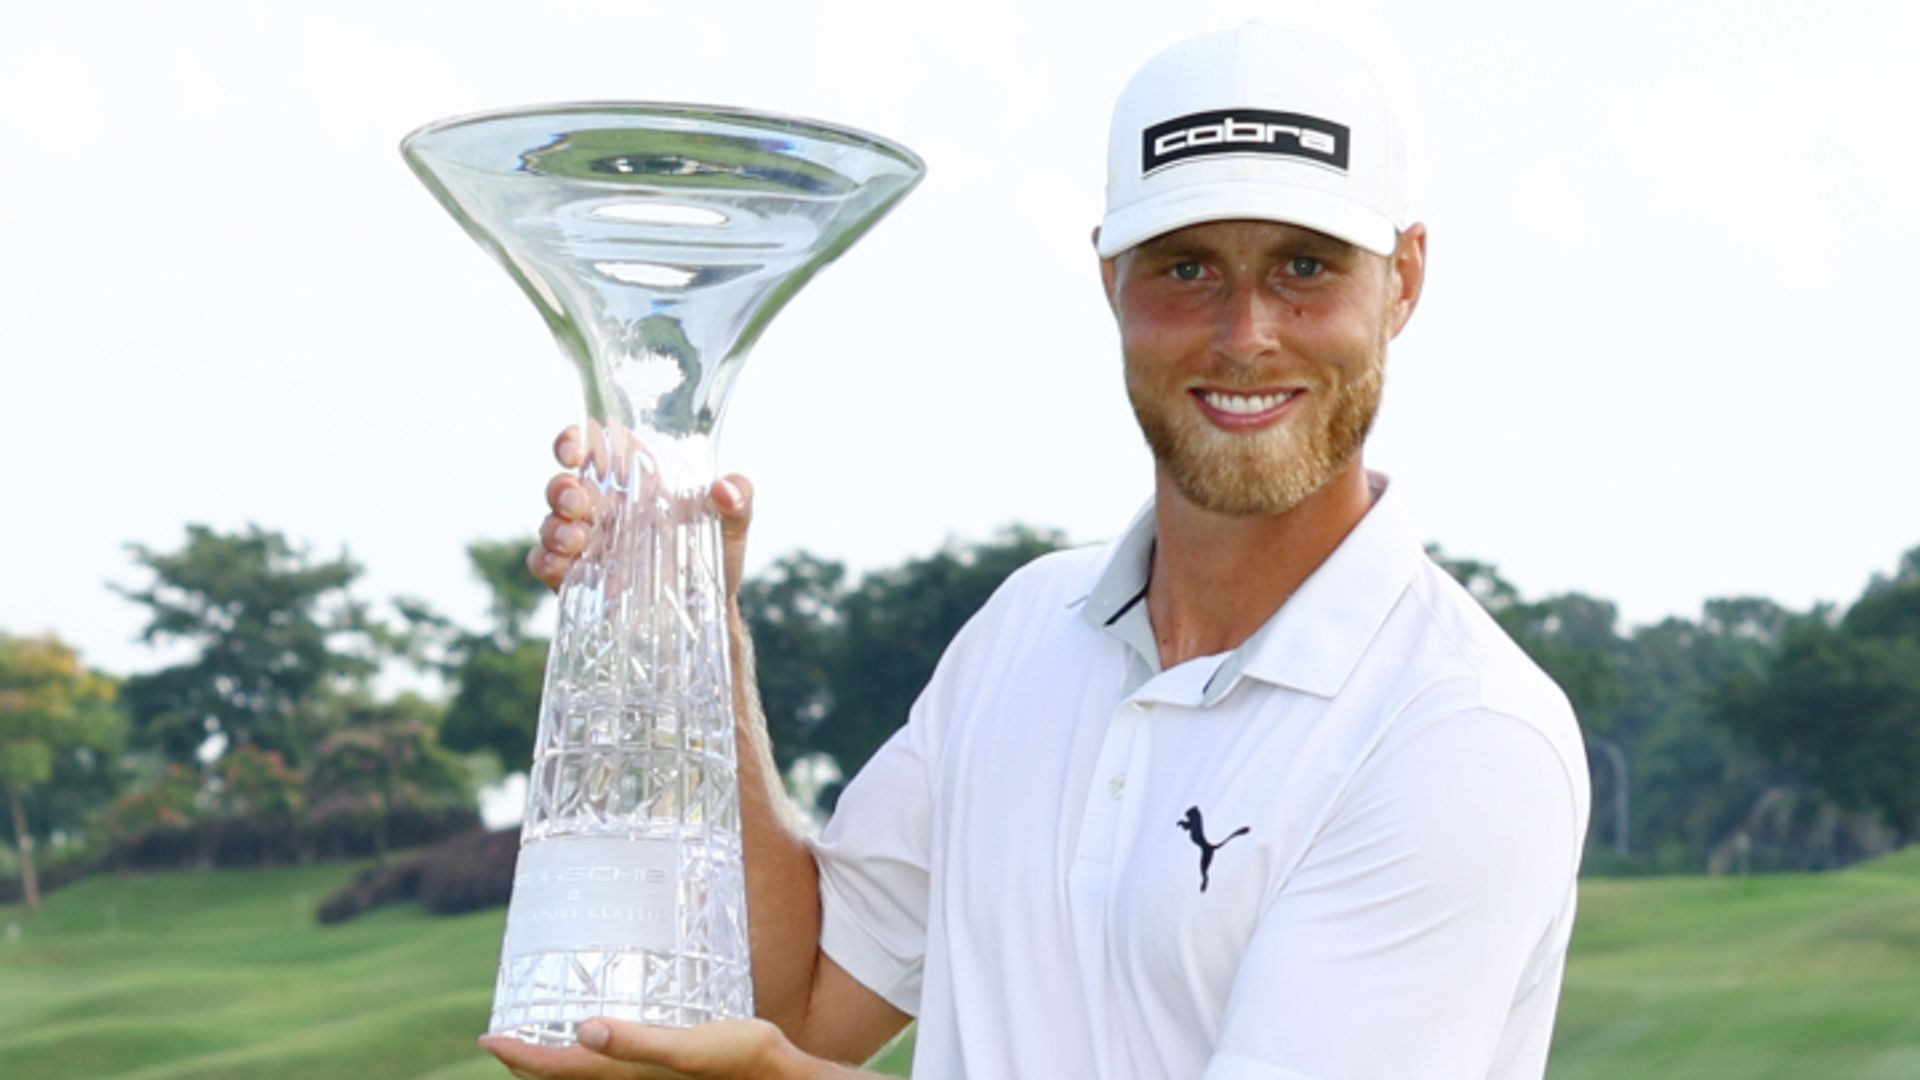 Svensson beats Aphibarnrat in playoff to win Singapore Classic